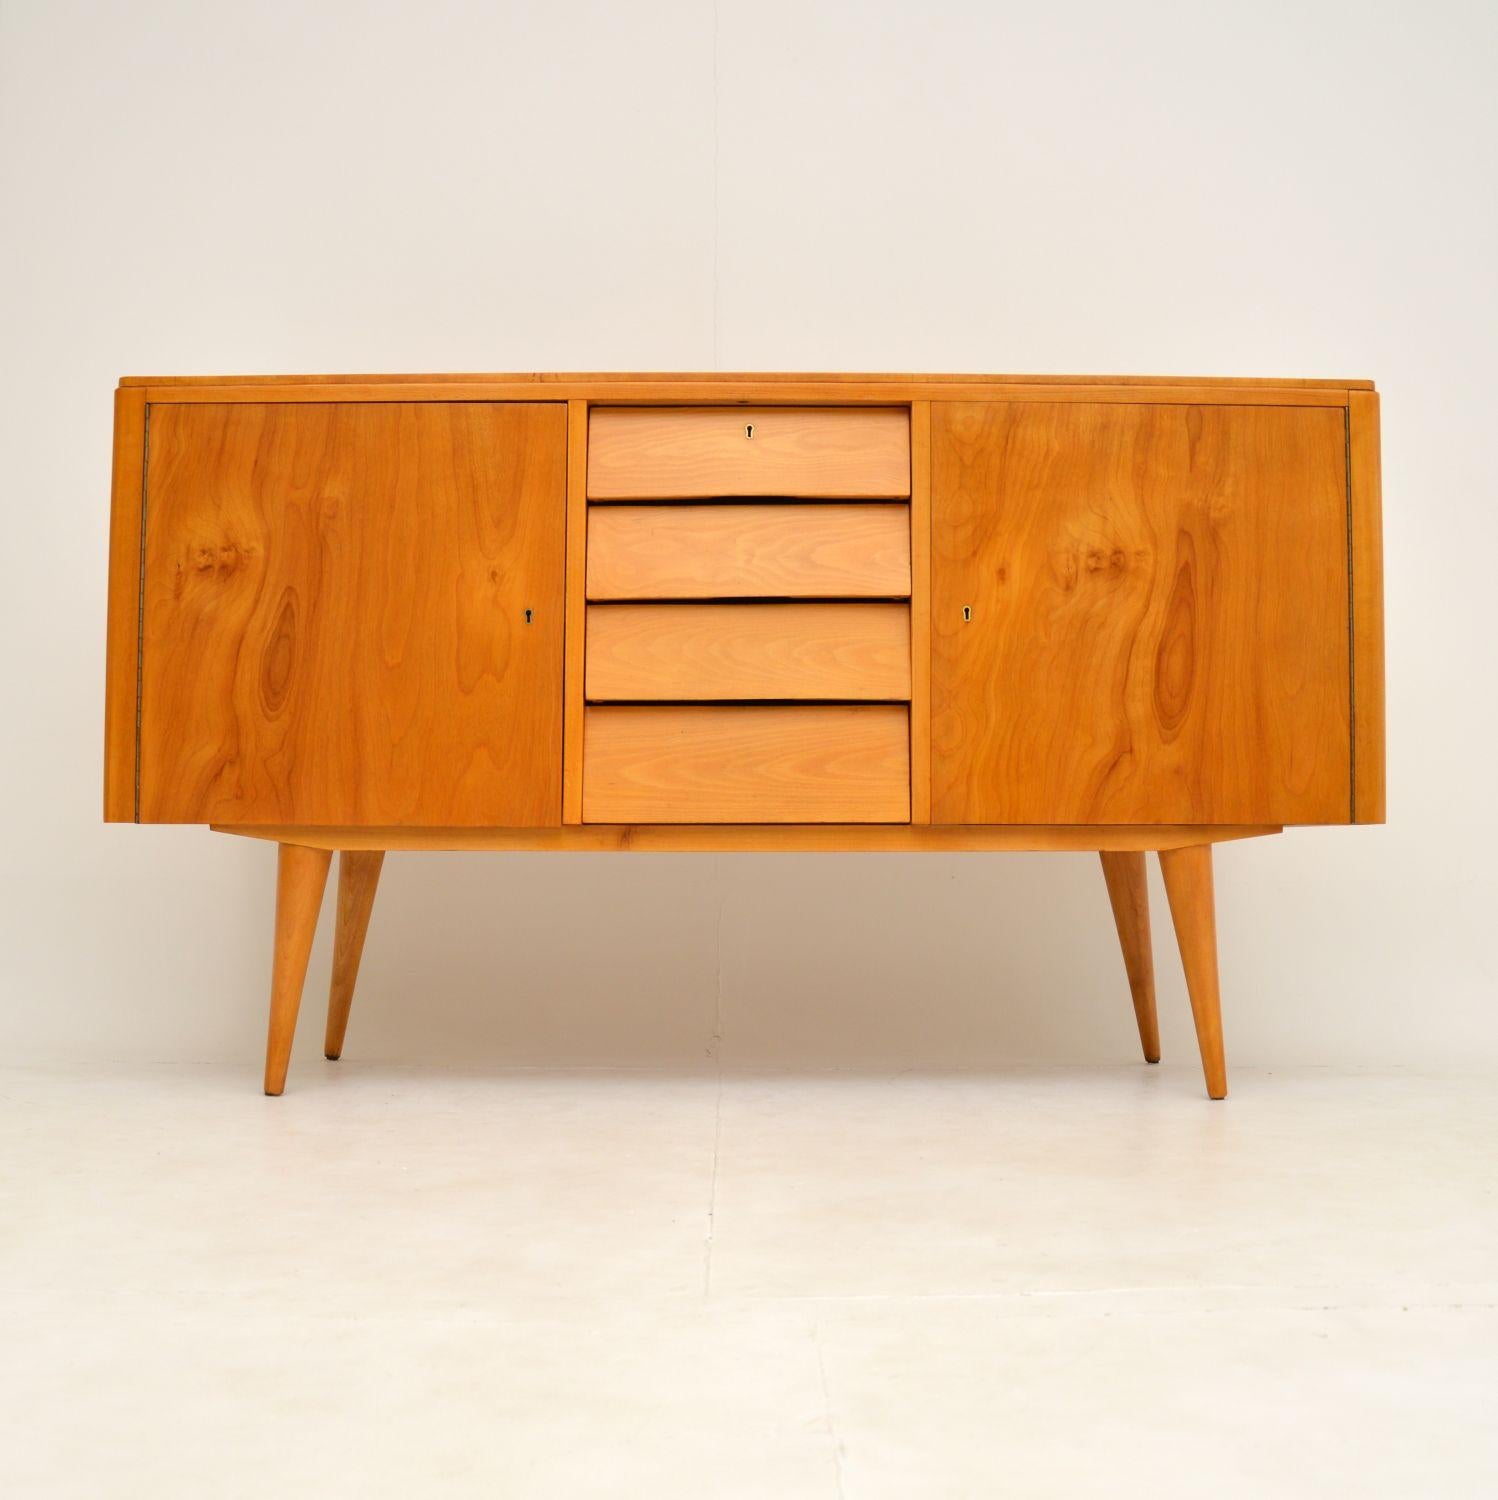 A stunning vintage sideboard, beautifully made from satin birch. This dates from the 1950’s, and was made in Britain.

This sideboard has a very interesting story and is well travelled. Originally purchased in England in the 1950’s, the previous